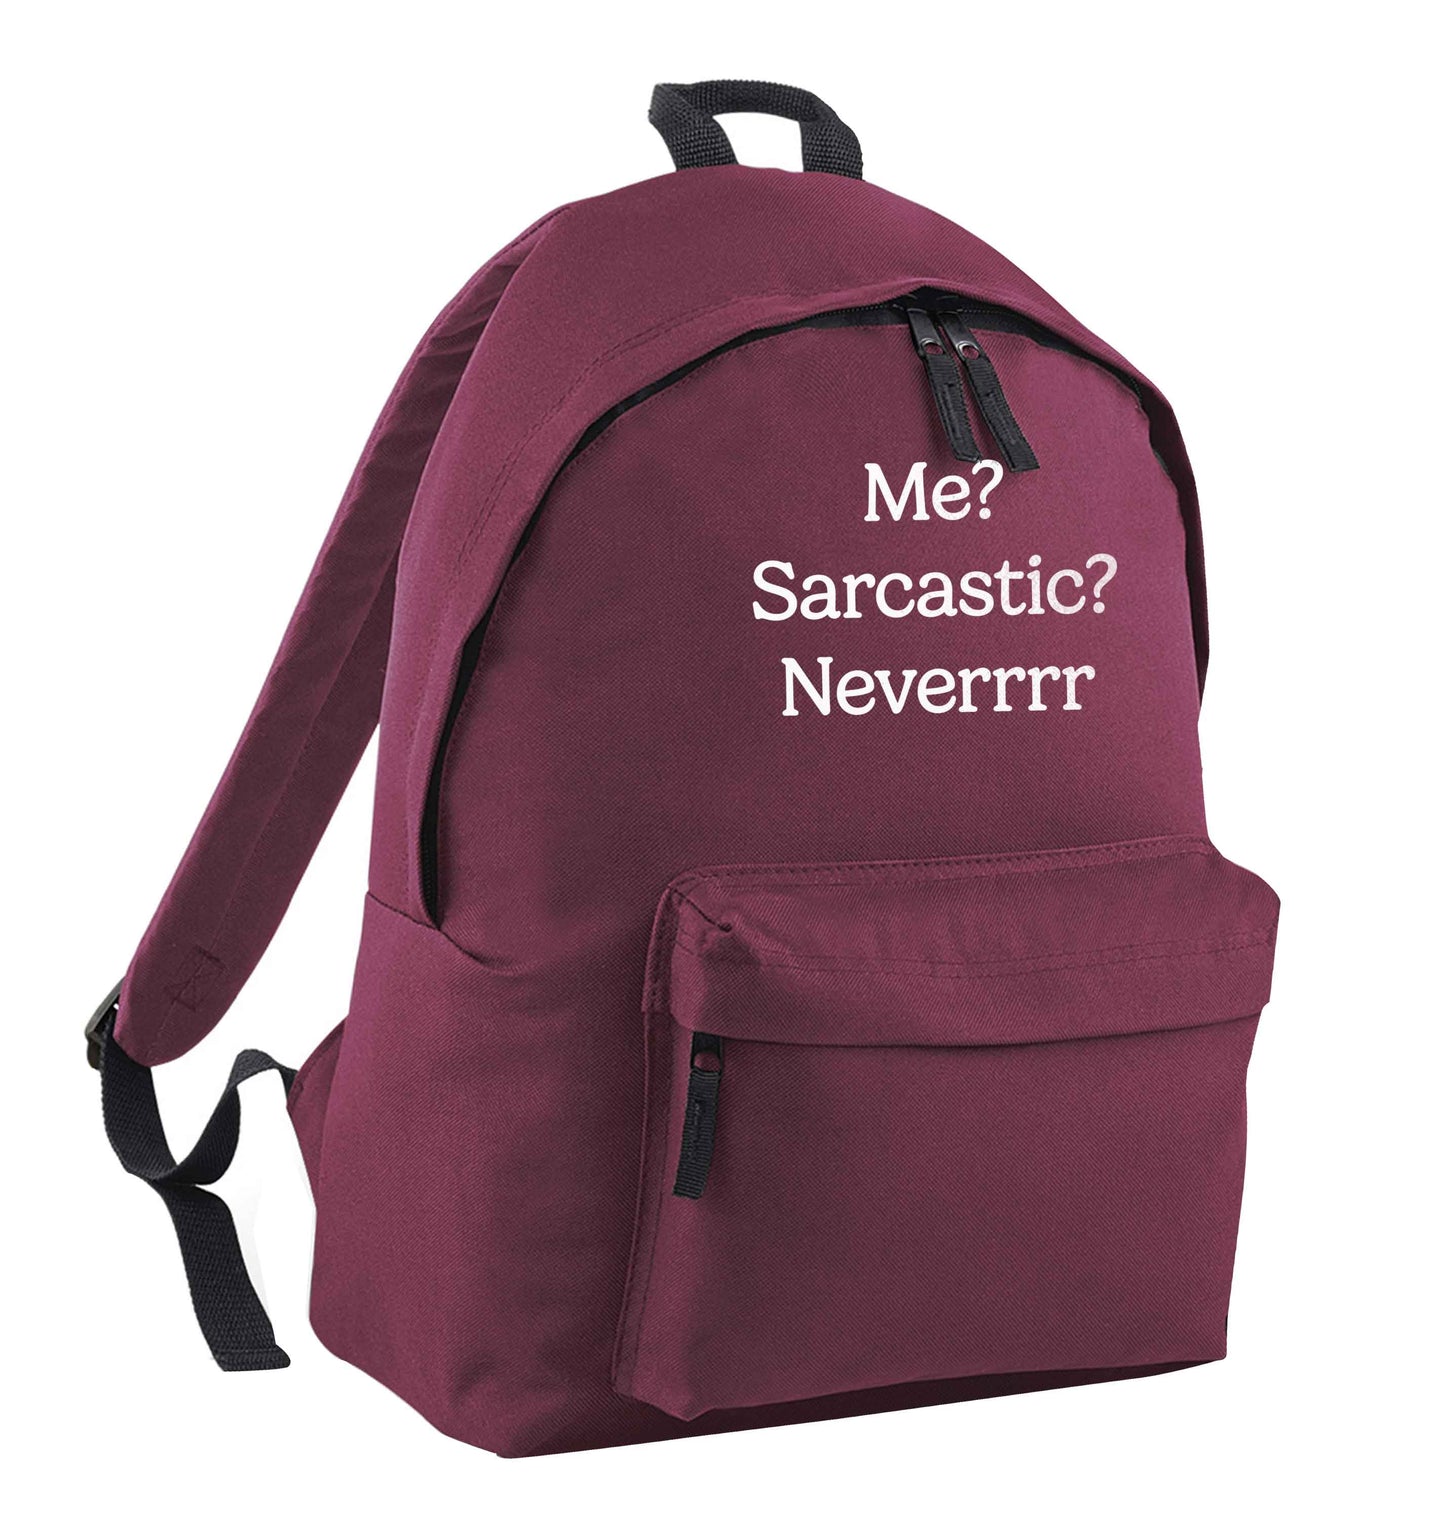 Me? sarcastic? never maroon adults backpack